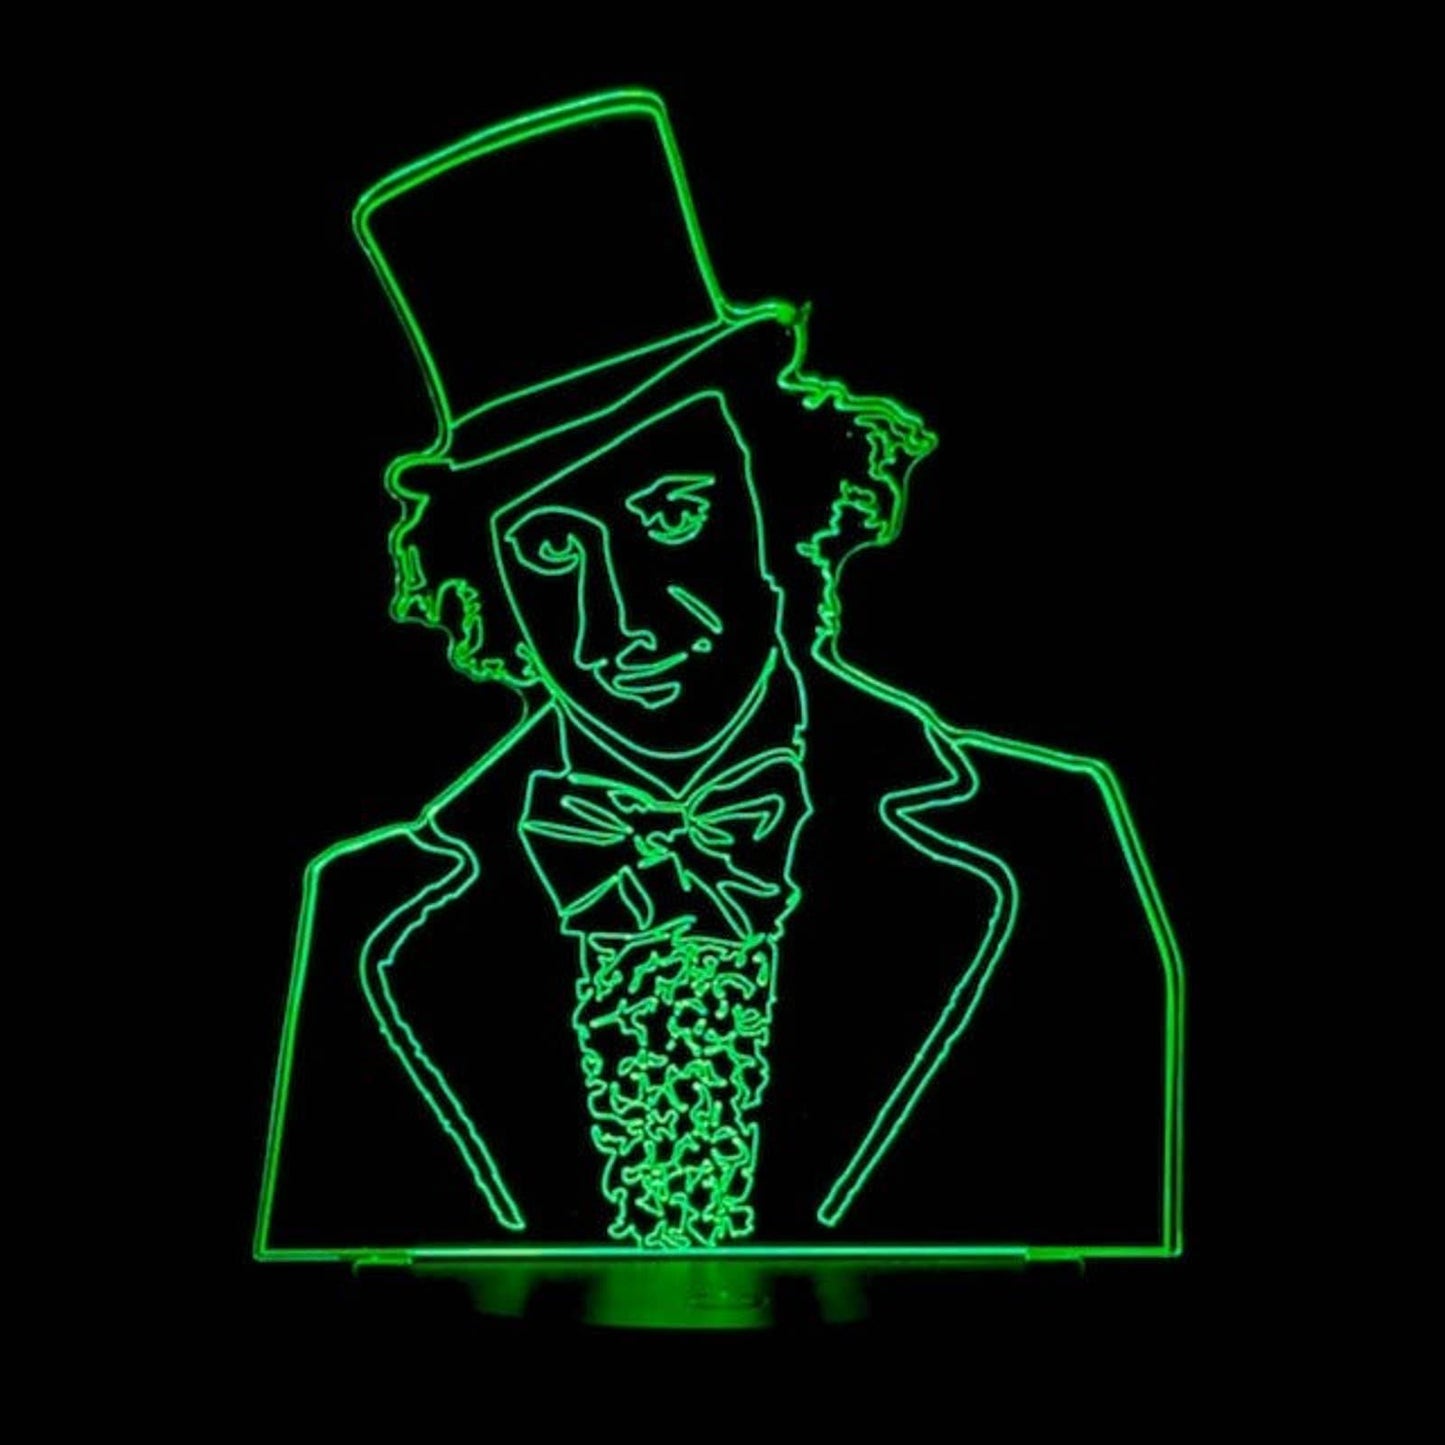 Willy Wonka 3D LED Night-Light 7 Color Changing Lamp w/ Touch Switch